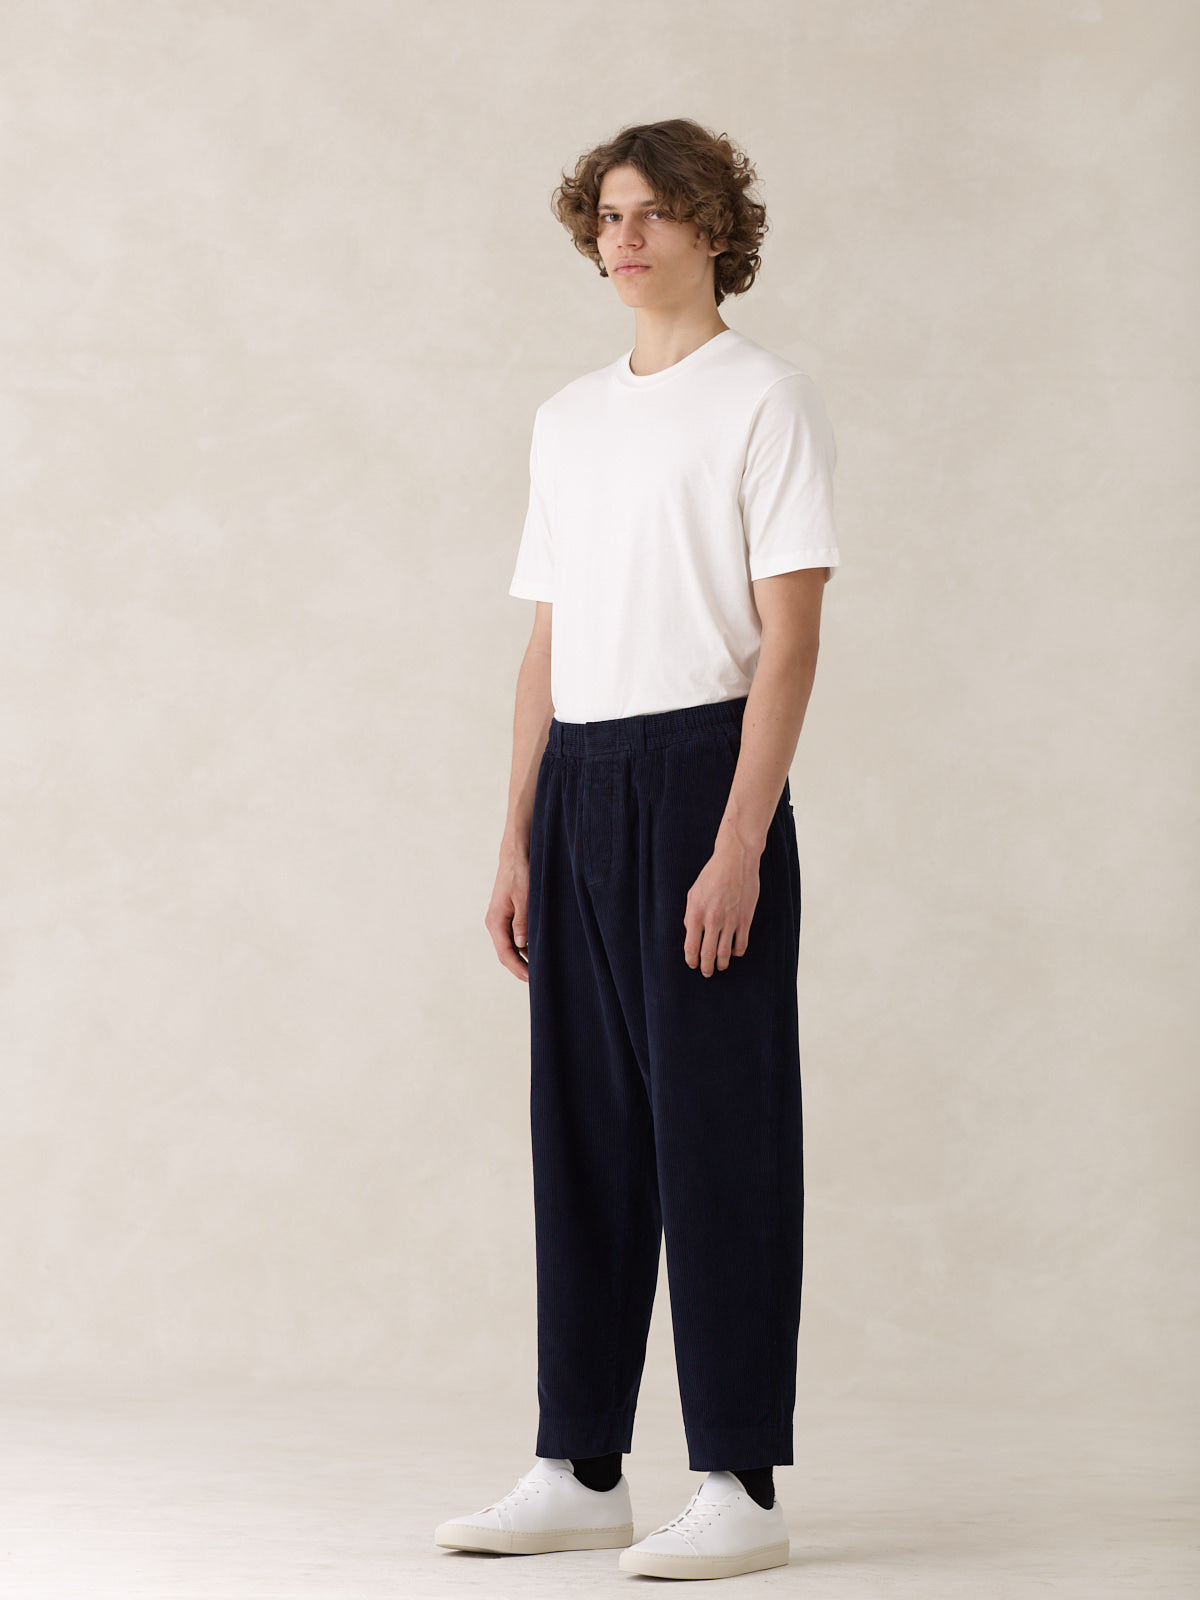 oftt - 01 - perfect fit t-shirt - white - navy corduroy trousers - organic cotton